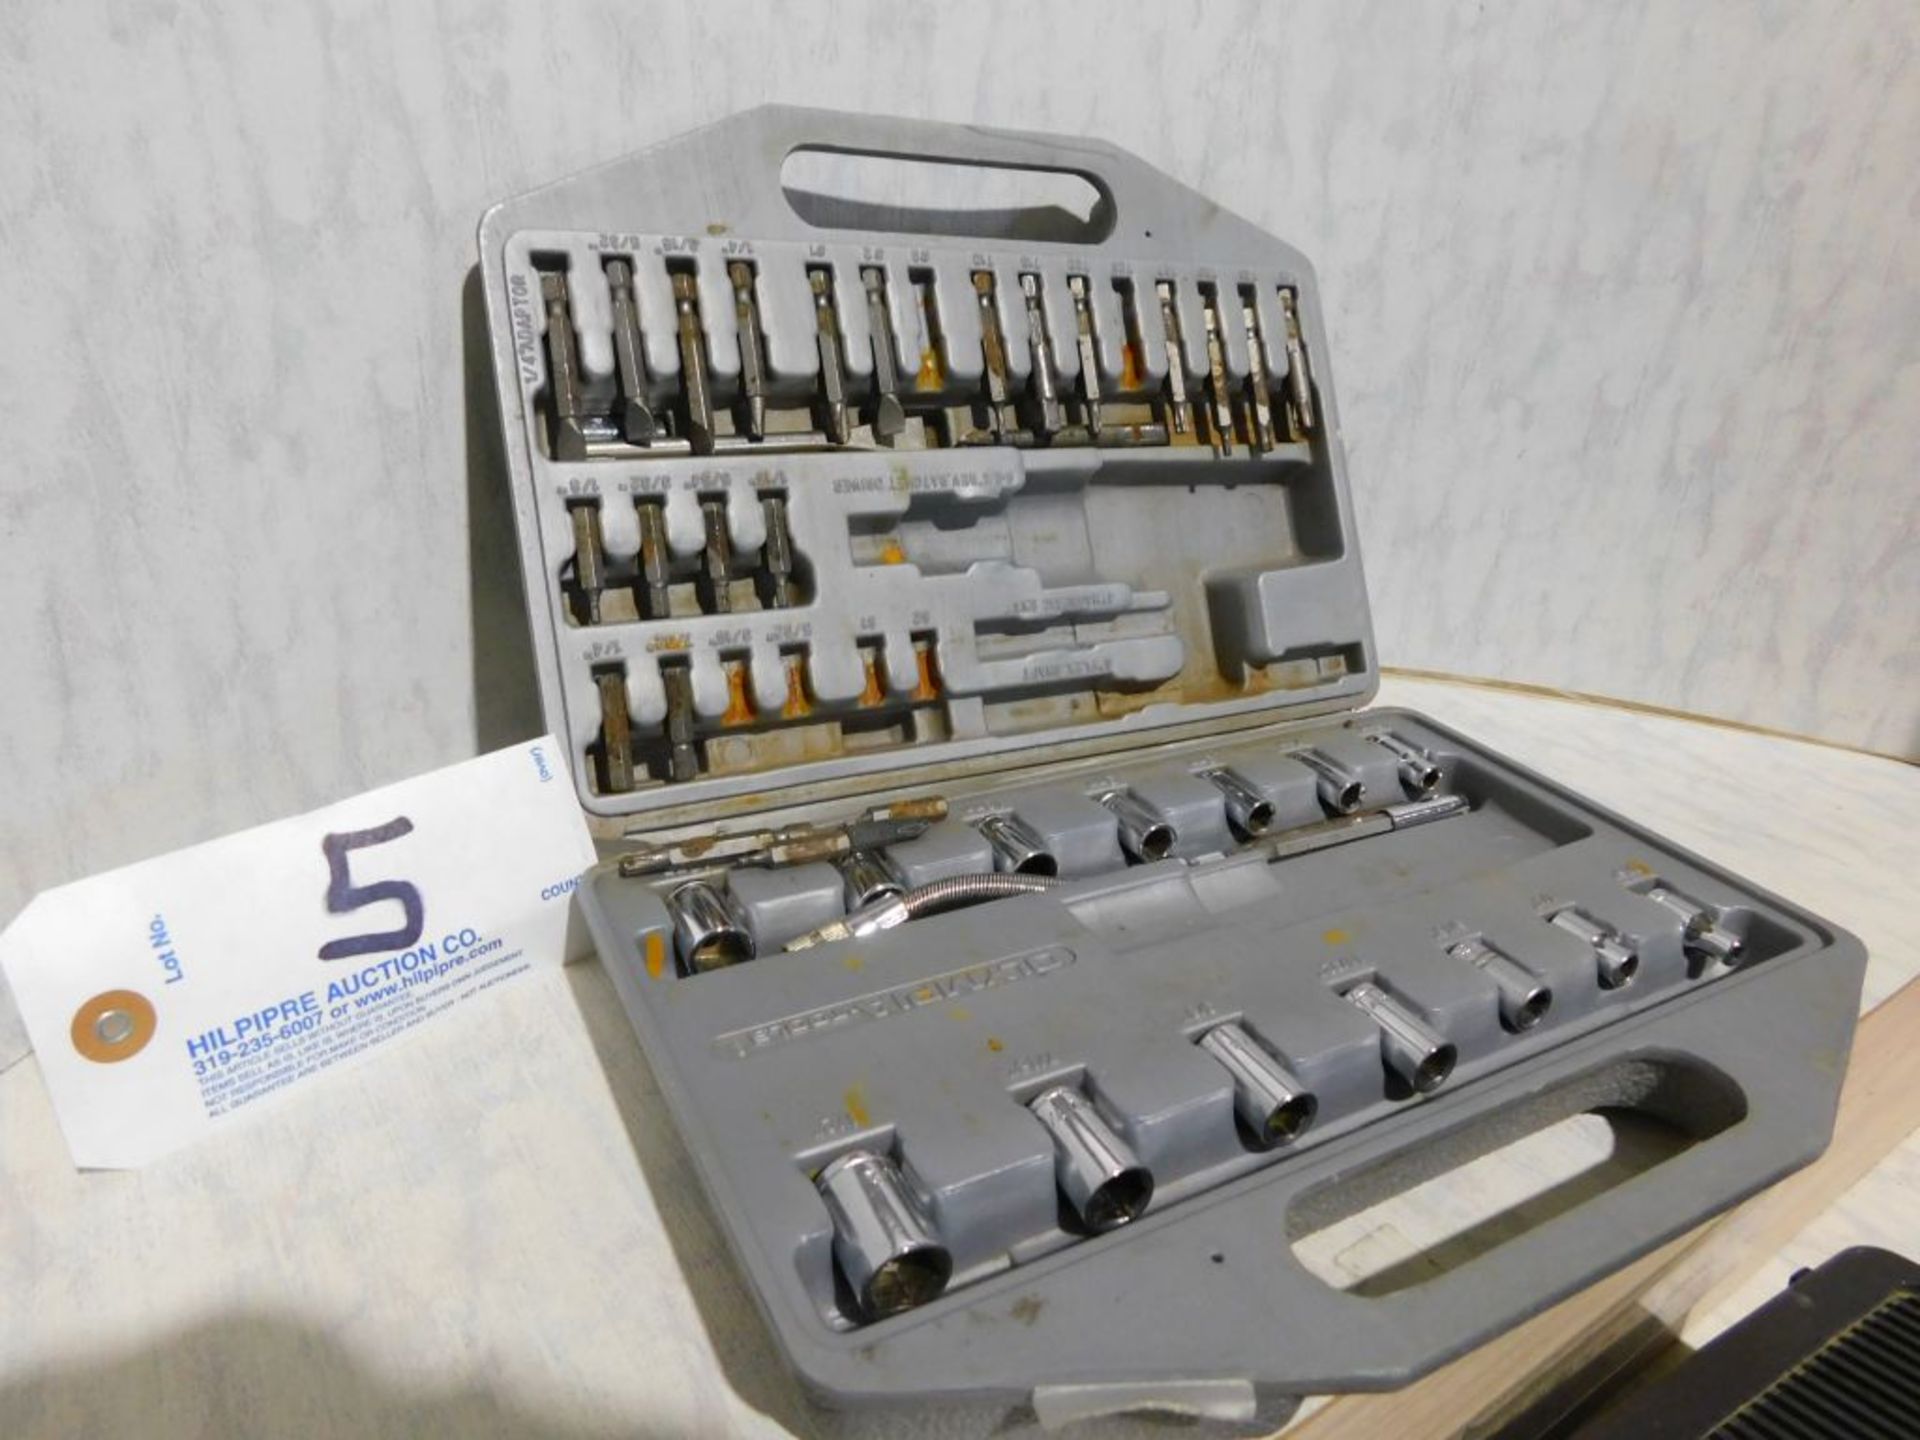 Socket set w/screw extractors, etc. (Located at and to be picked up at: 2862 Wagner Rd., Waterloo,